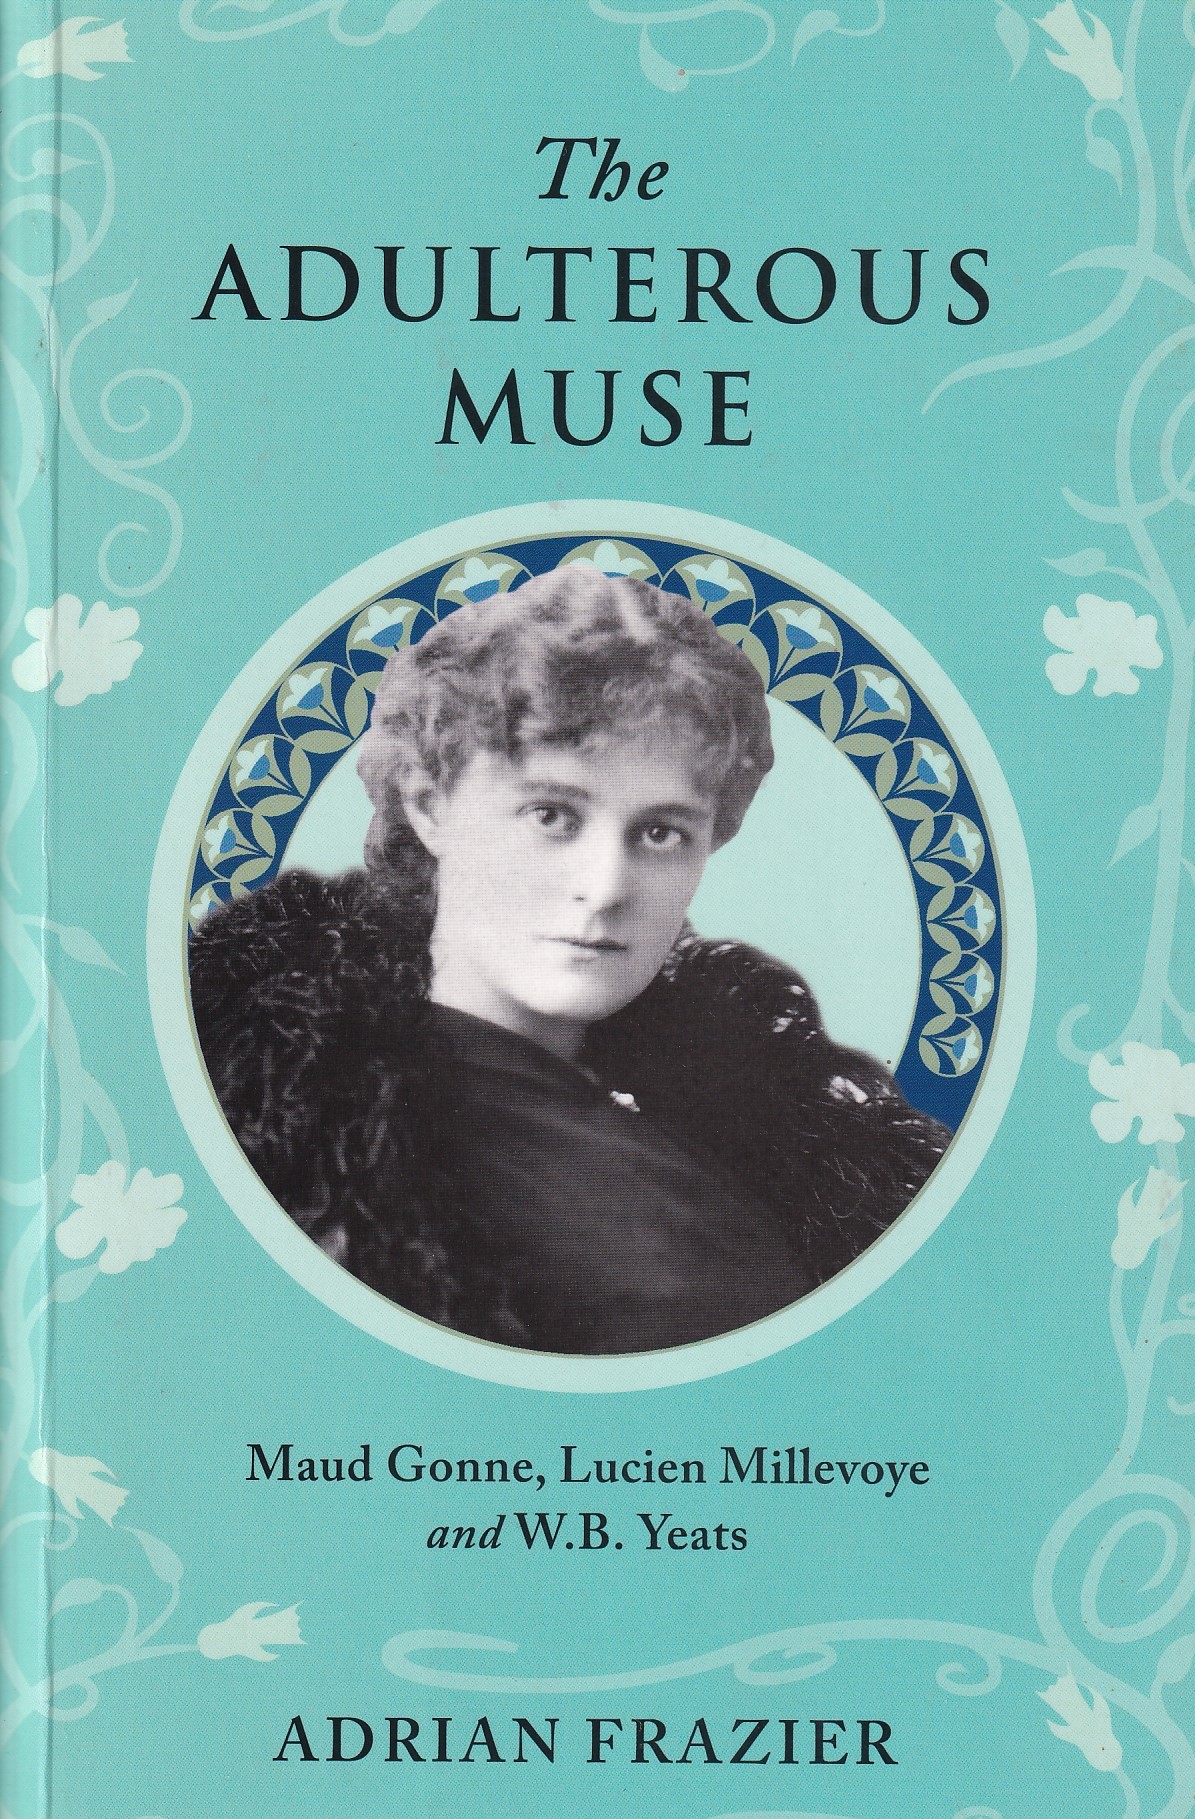 Adulterous Muse : Maude Gonne, Lucien Millevoye and W.B. Yeats [Signed] | Adrian Frazier | Charlie Byrne's